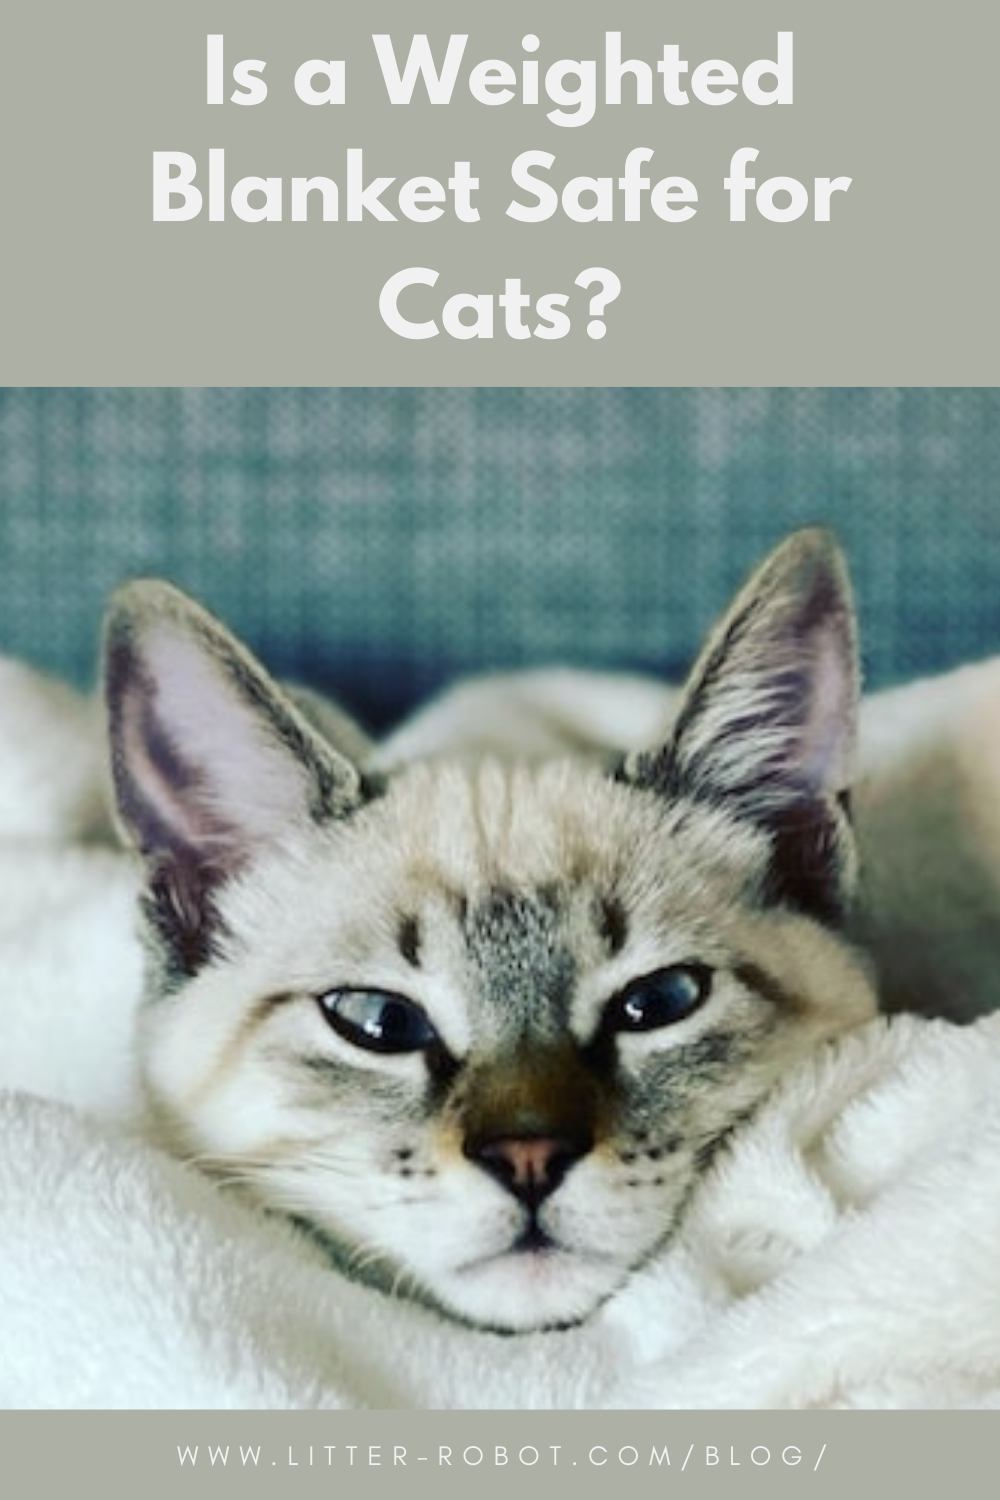 Is a Weighted Blanket Safe for Cats? | Learn more on Litter-Robot Blog